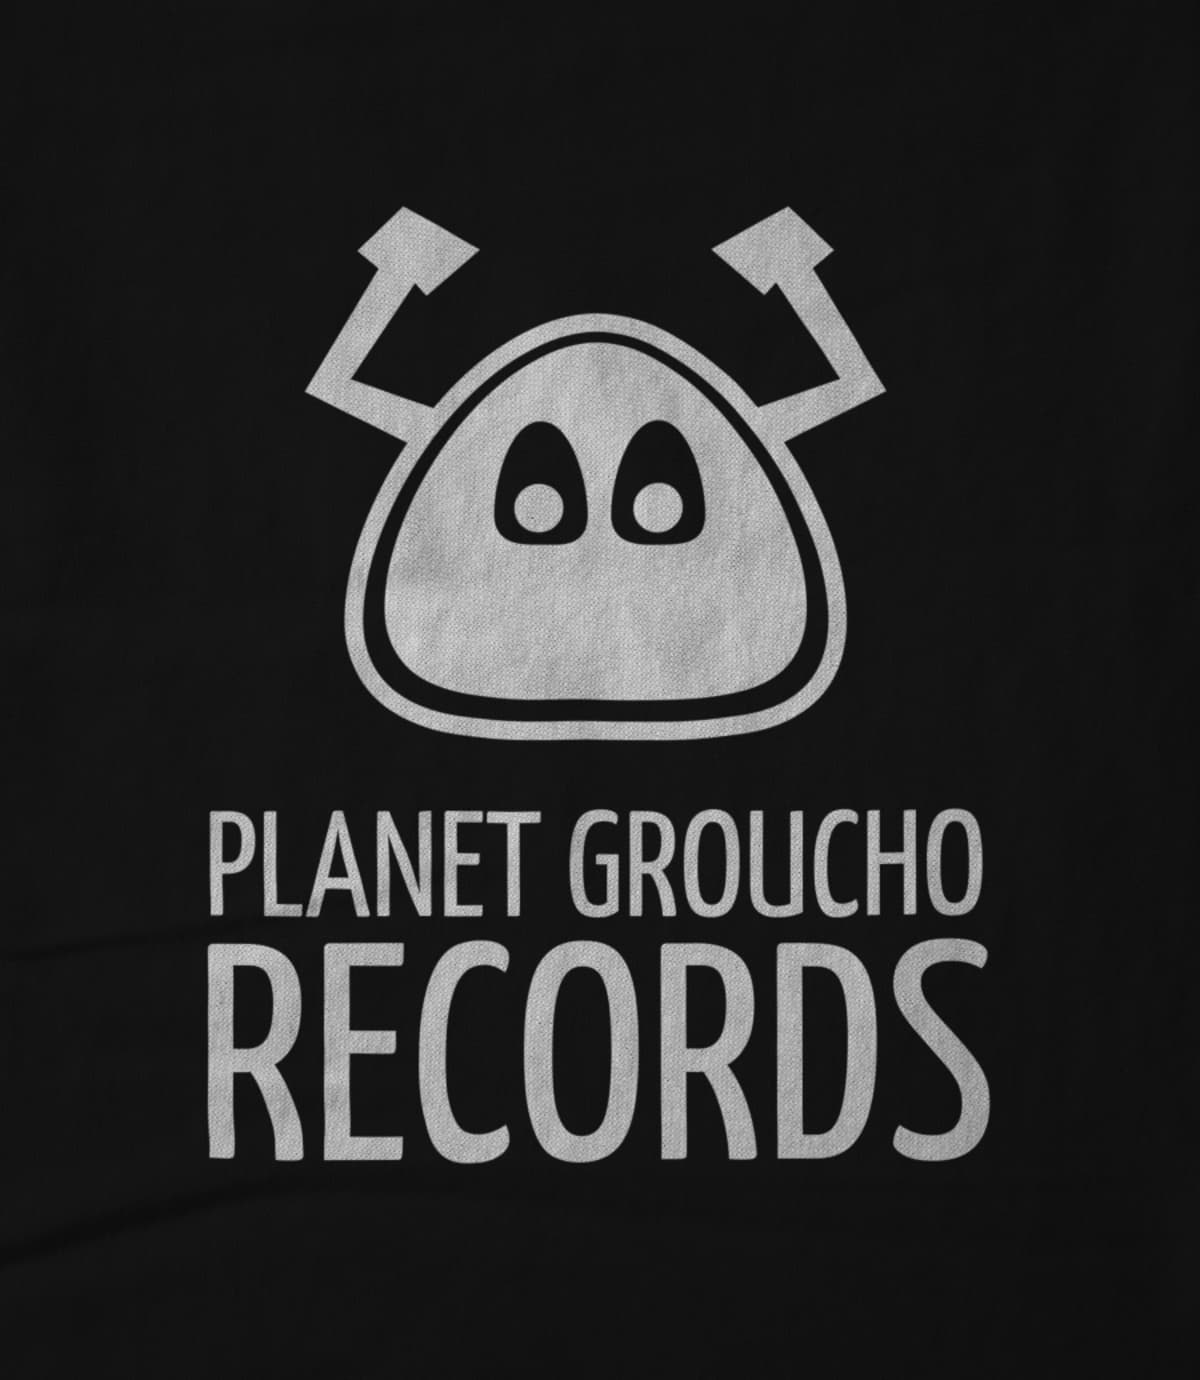 Planet Groucho Records